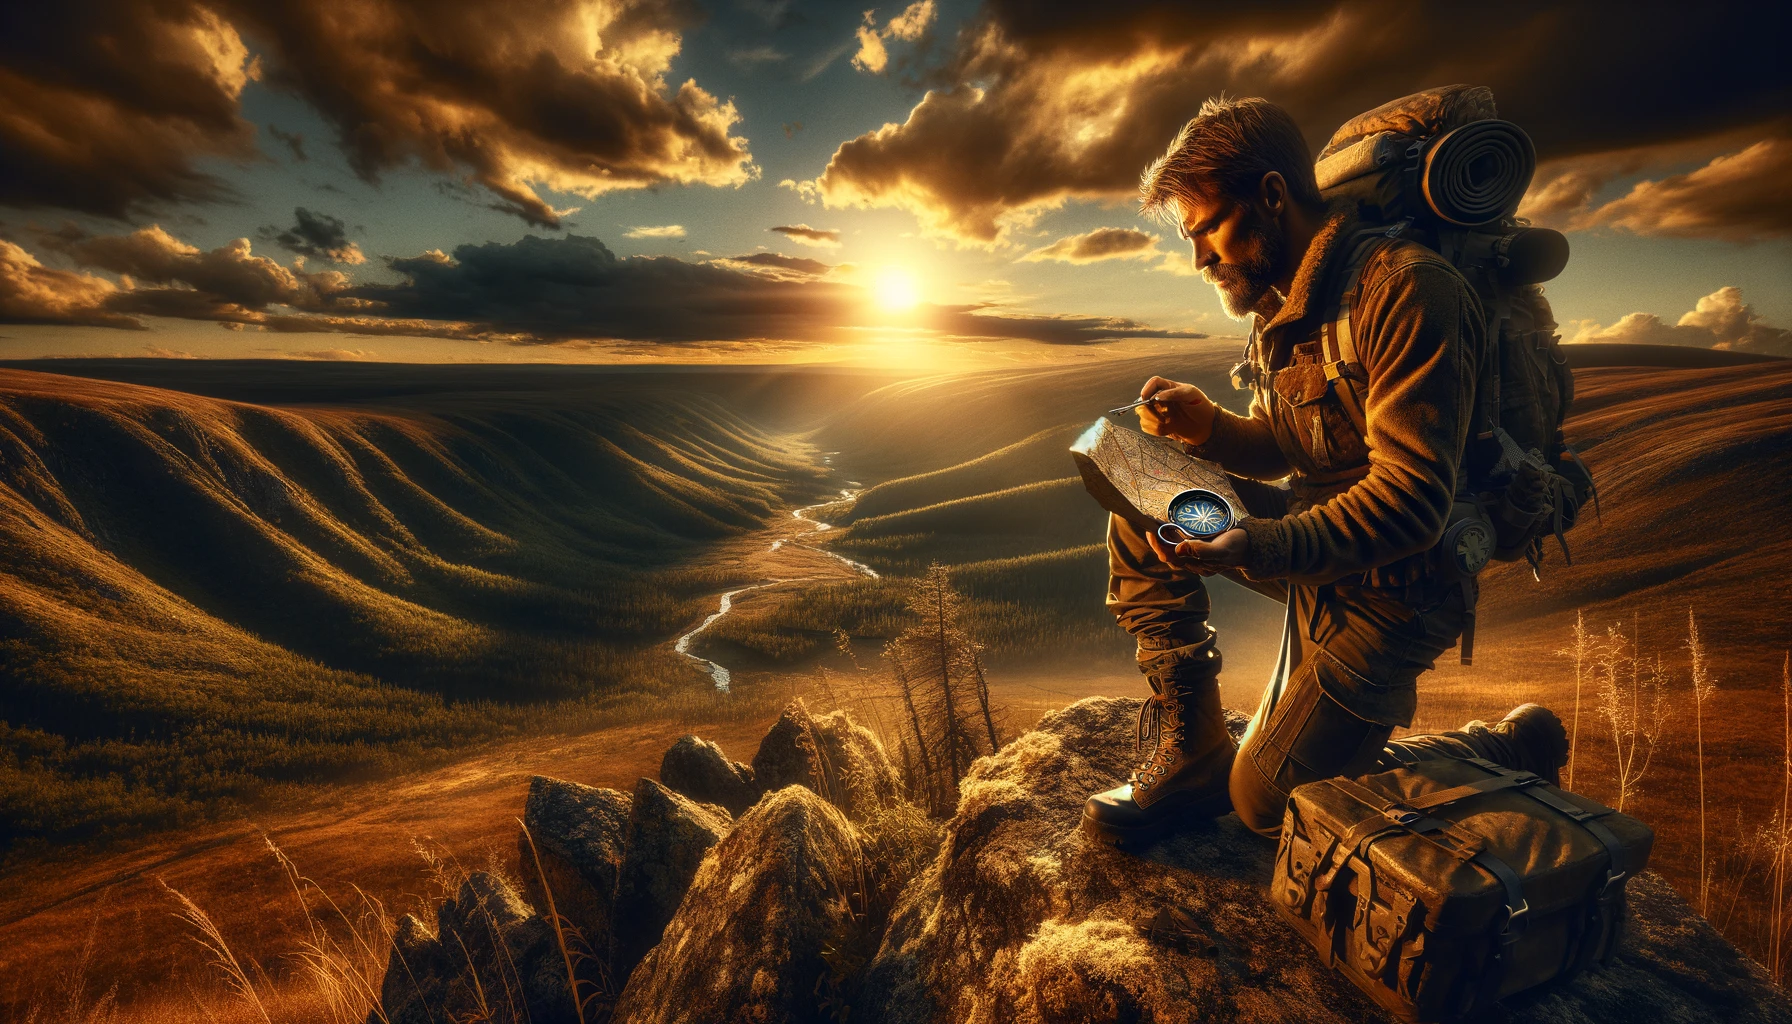 Prepper mastering navigation on a rugged hill at sunset, demonstrating resilience and preparedness in a challenging wilderness, with a compass and map in hand amidst dramatic lighting